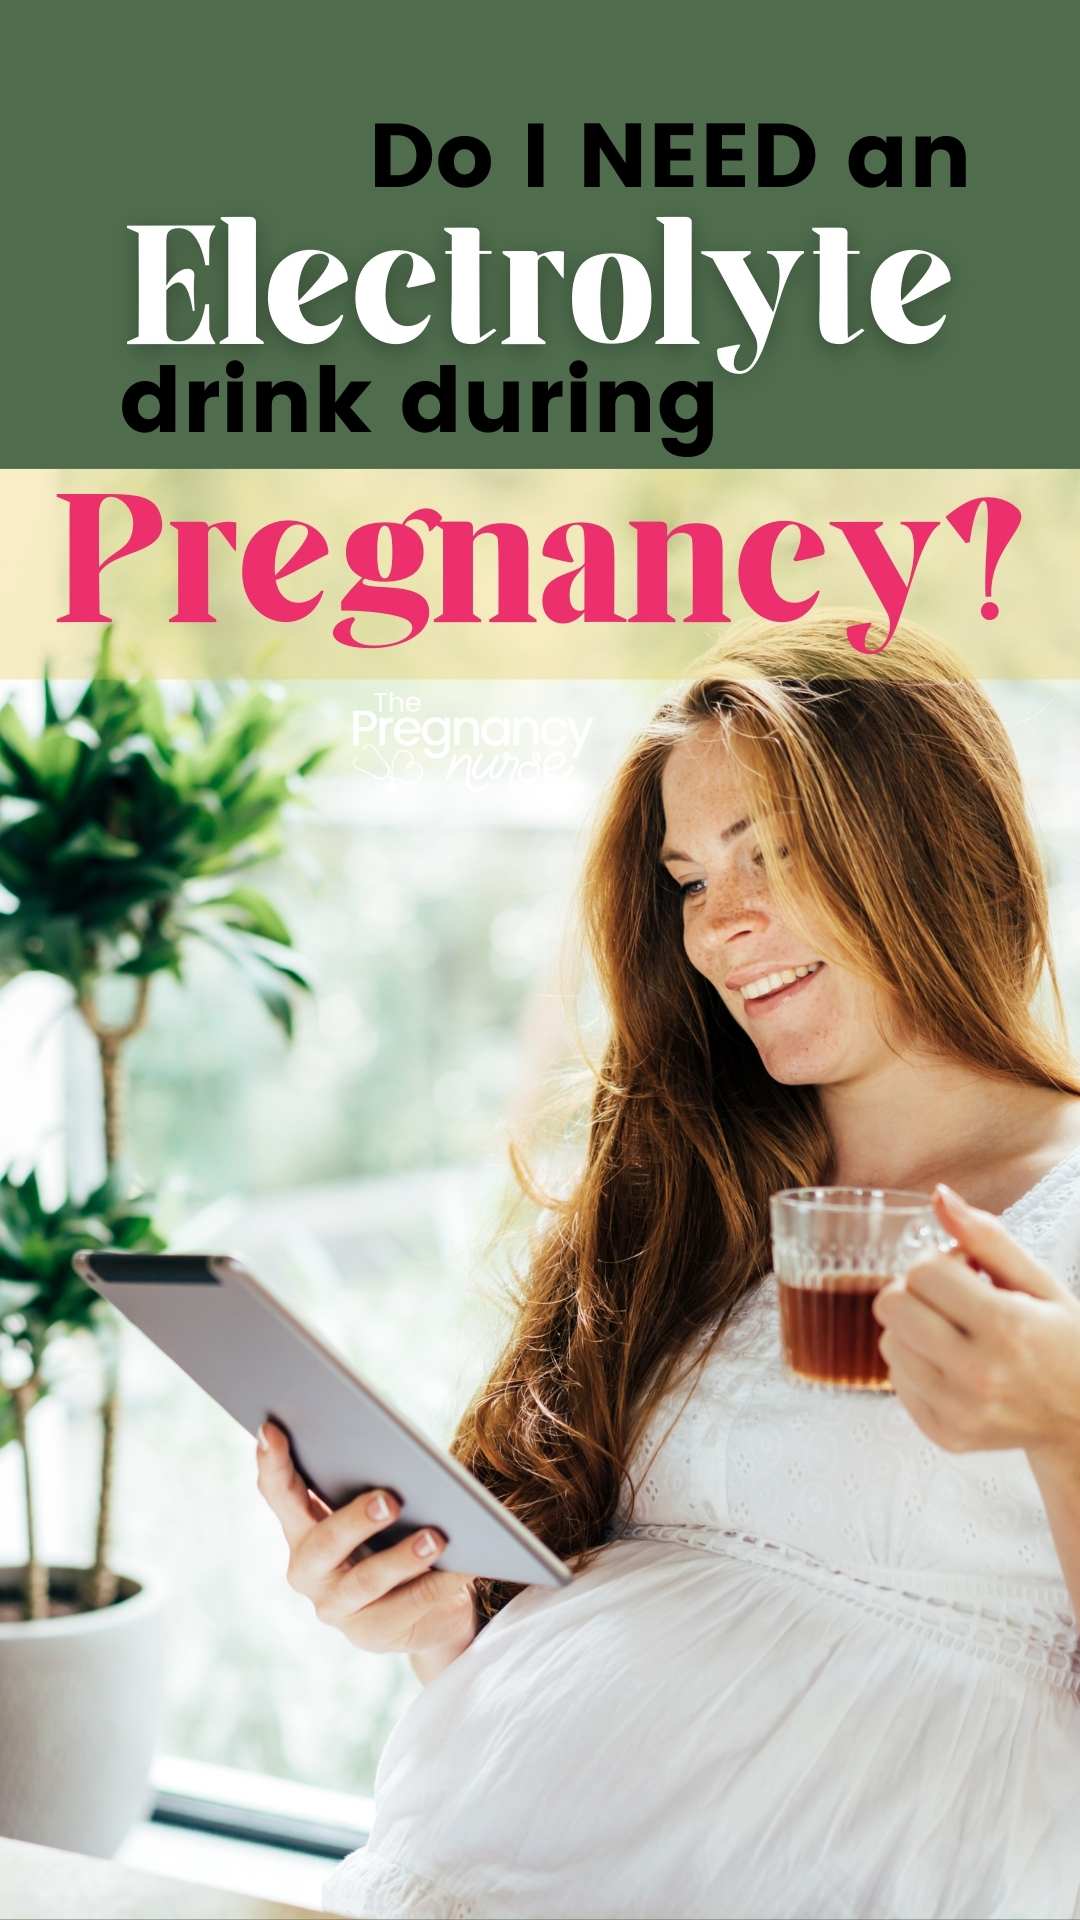 Did you know that staying hydrated is crucial during pregnancy? Make sure to drink plenty of fluids, especially water, but also sports drinks and electrolyte-rich drinks like coconut water or pedialyte. Here are some tips on how to make sure you're getting enough fluids every day.